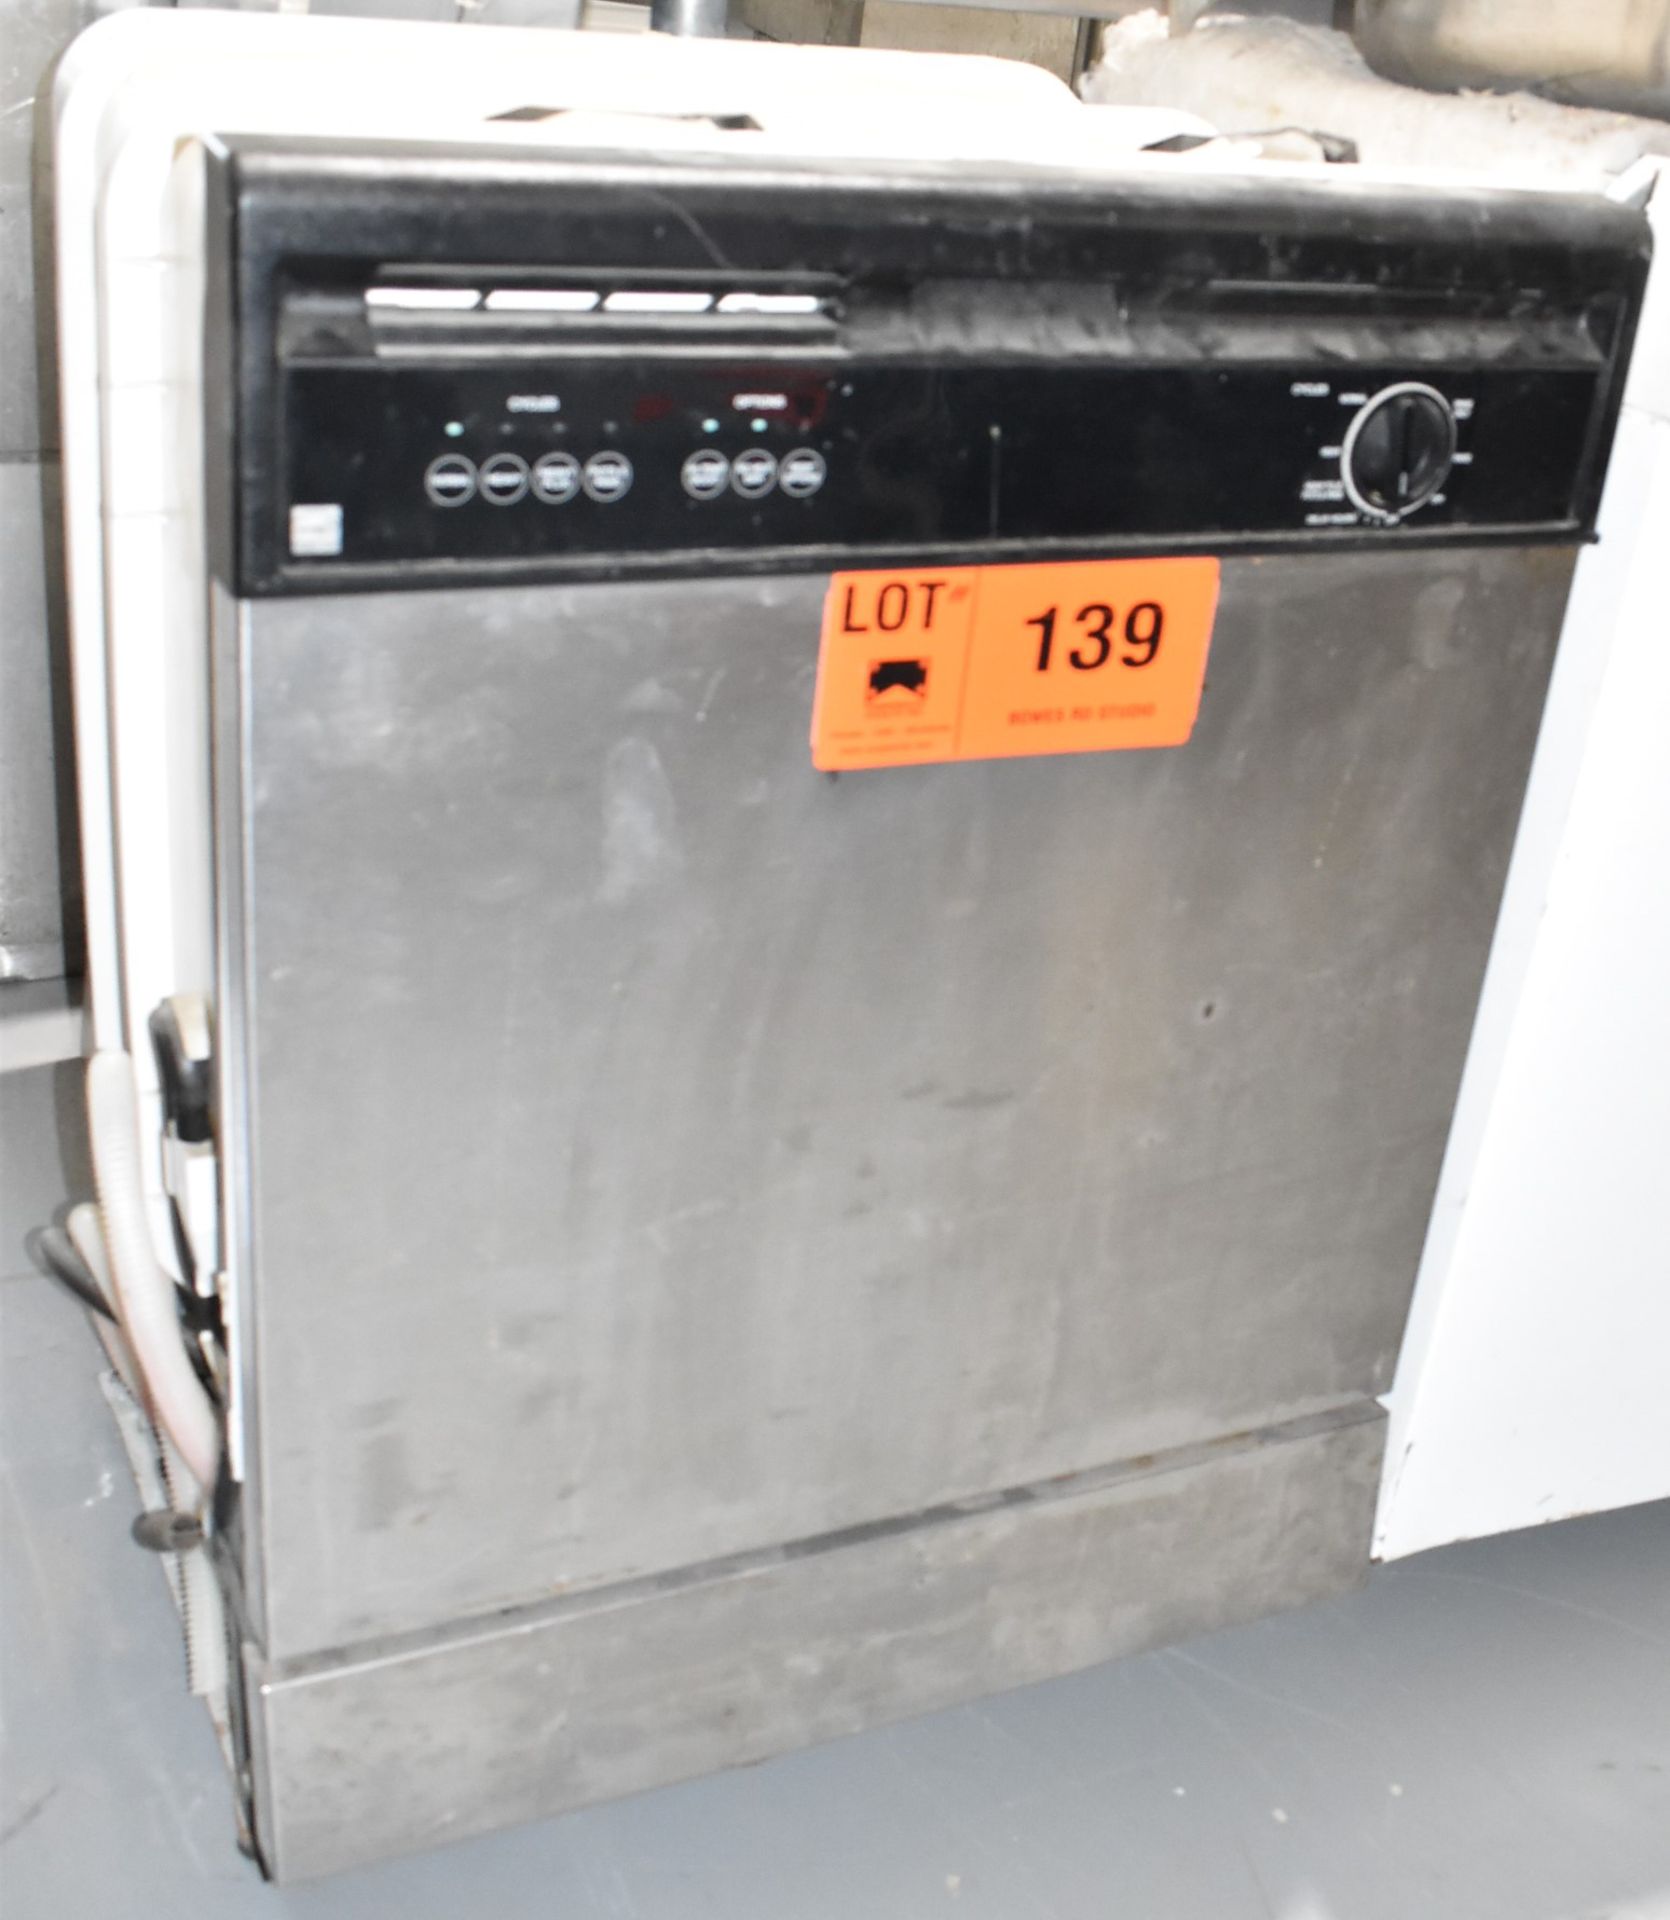 IKEA IUD6000WS1 DISHWASHER, S/N F04202874 [RIGGING FEES FOR LOT #139 - $25 CAD PLUS APPLICABLE